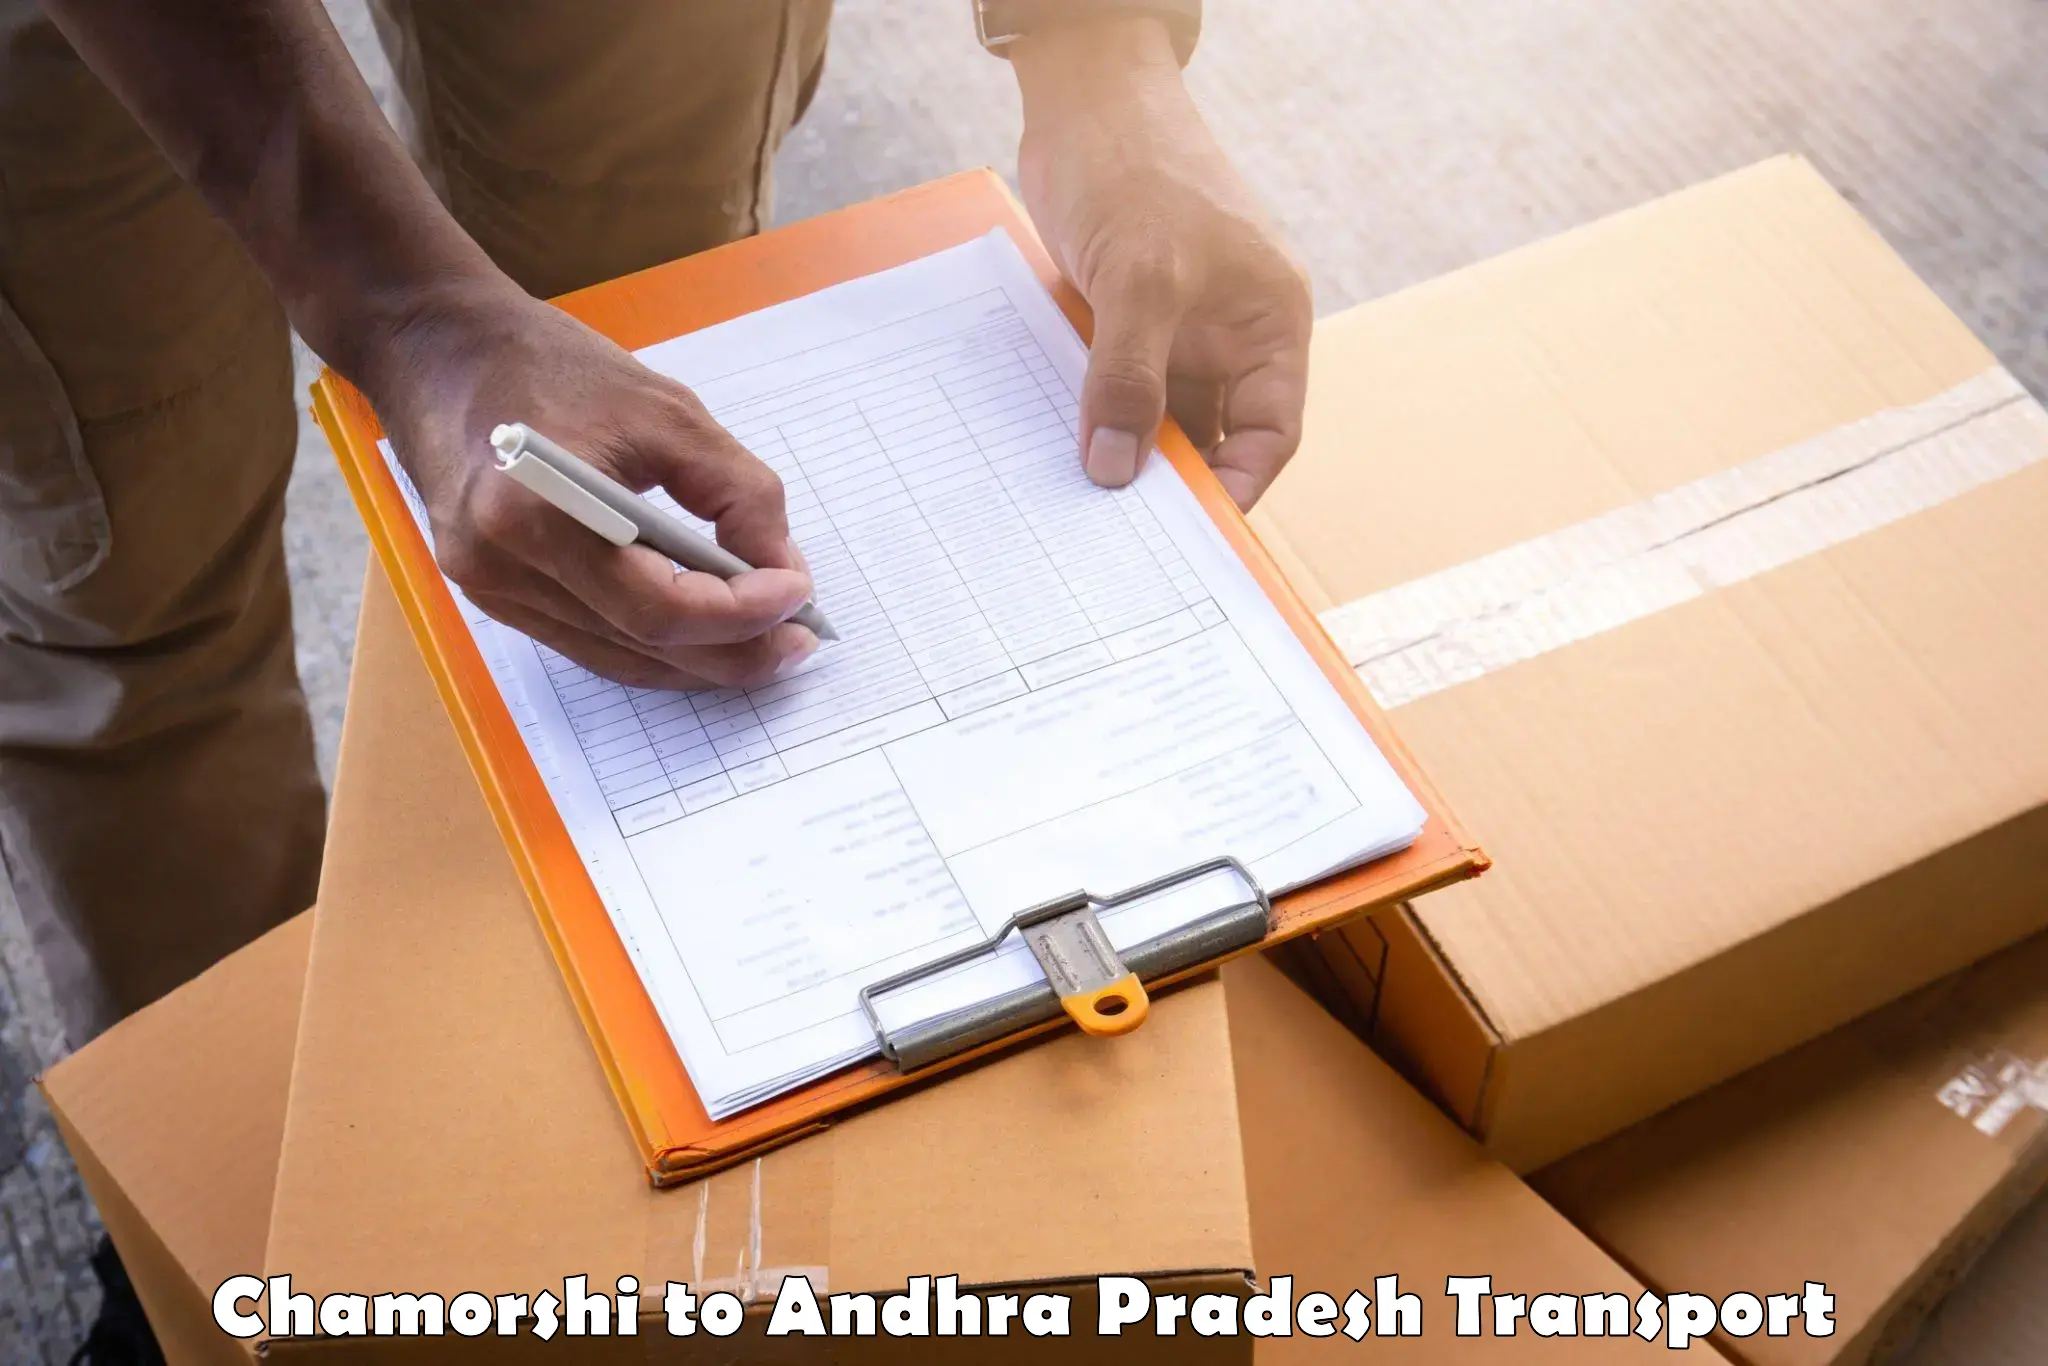 Part load transport service in India Chamorshi to Anantapur